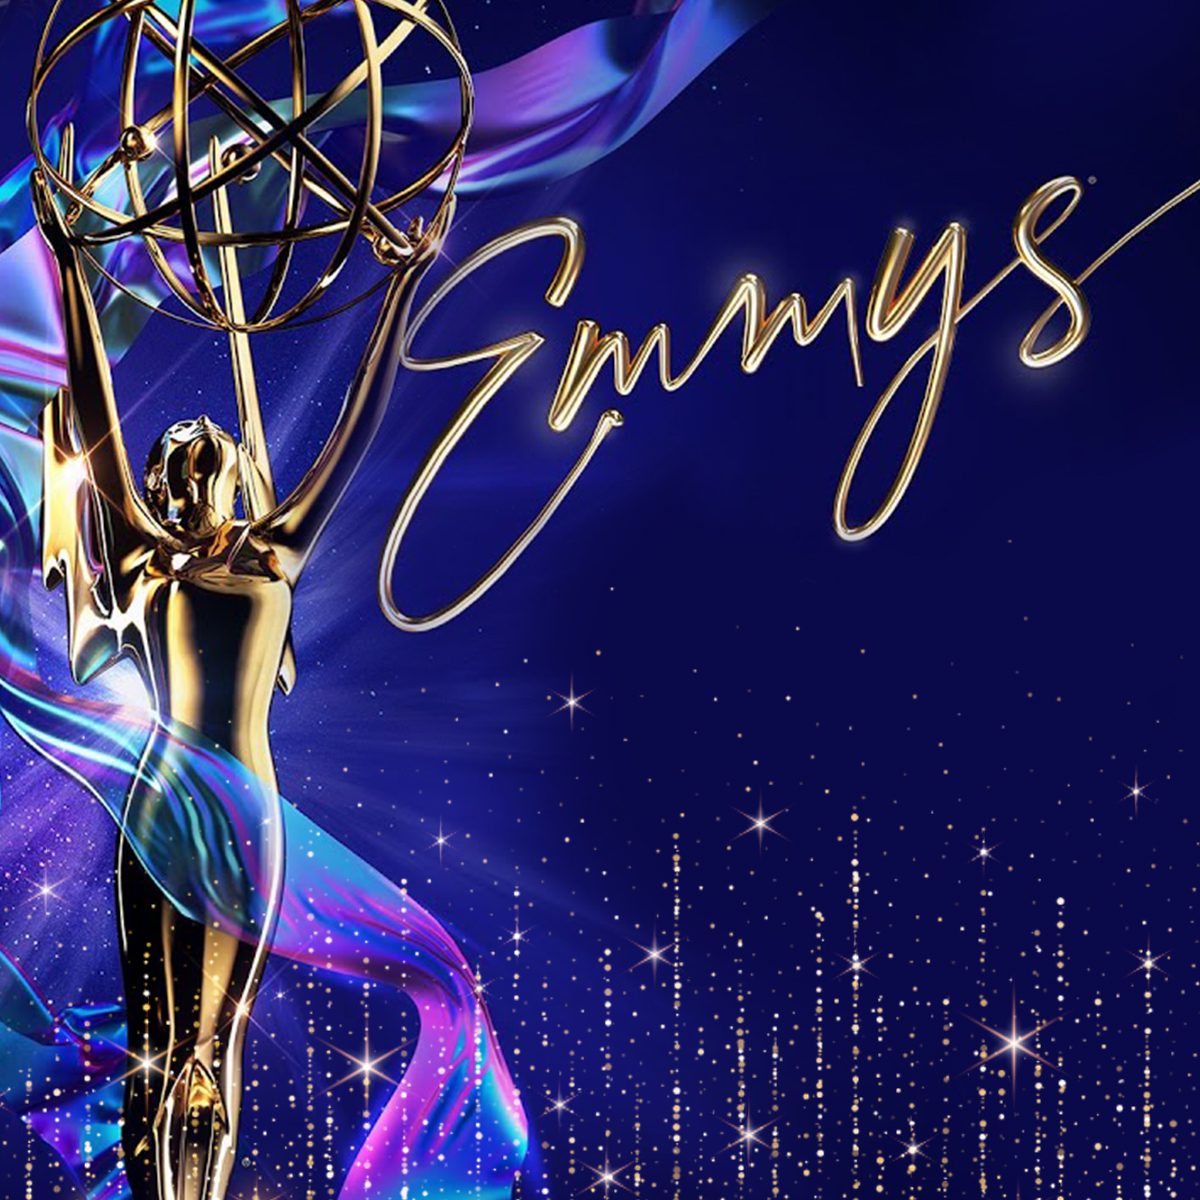 Emmys News, Pictures, and Videos E! Online